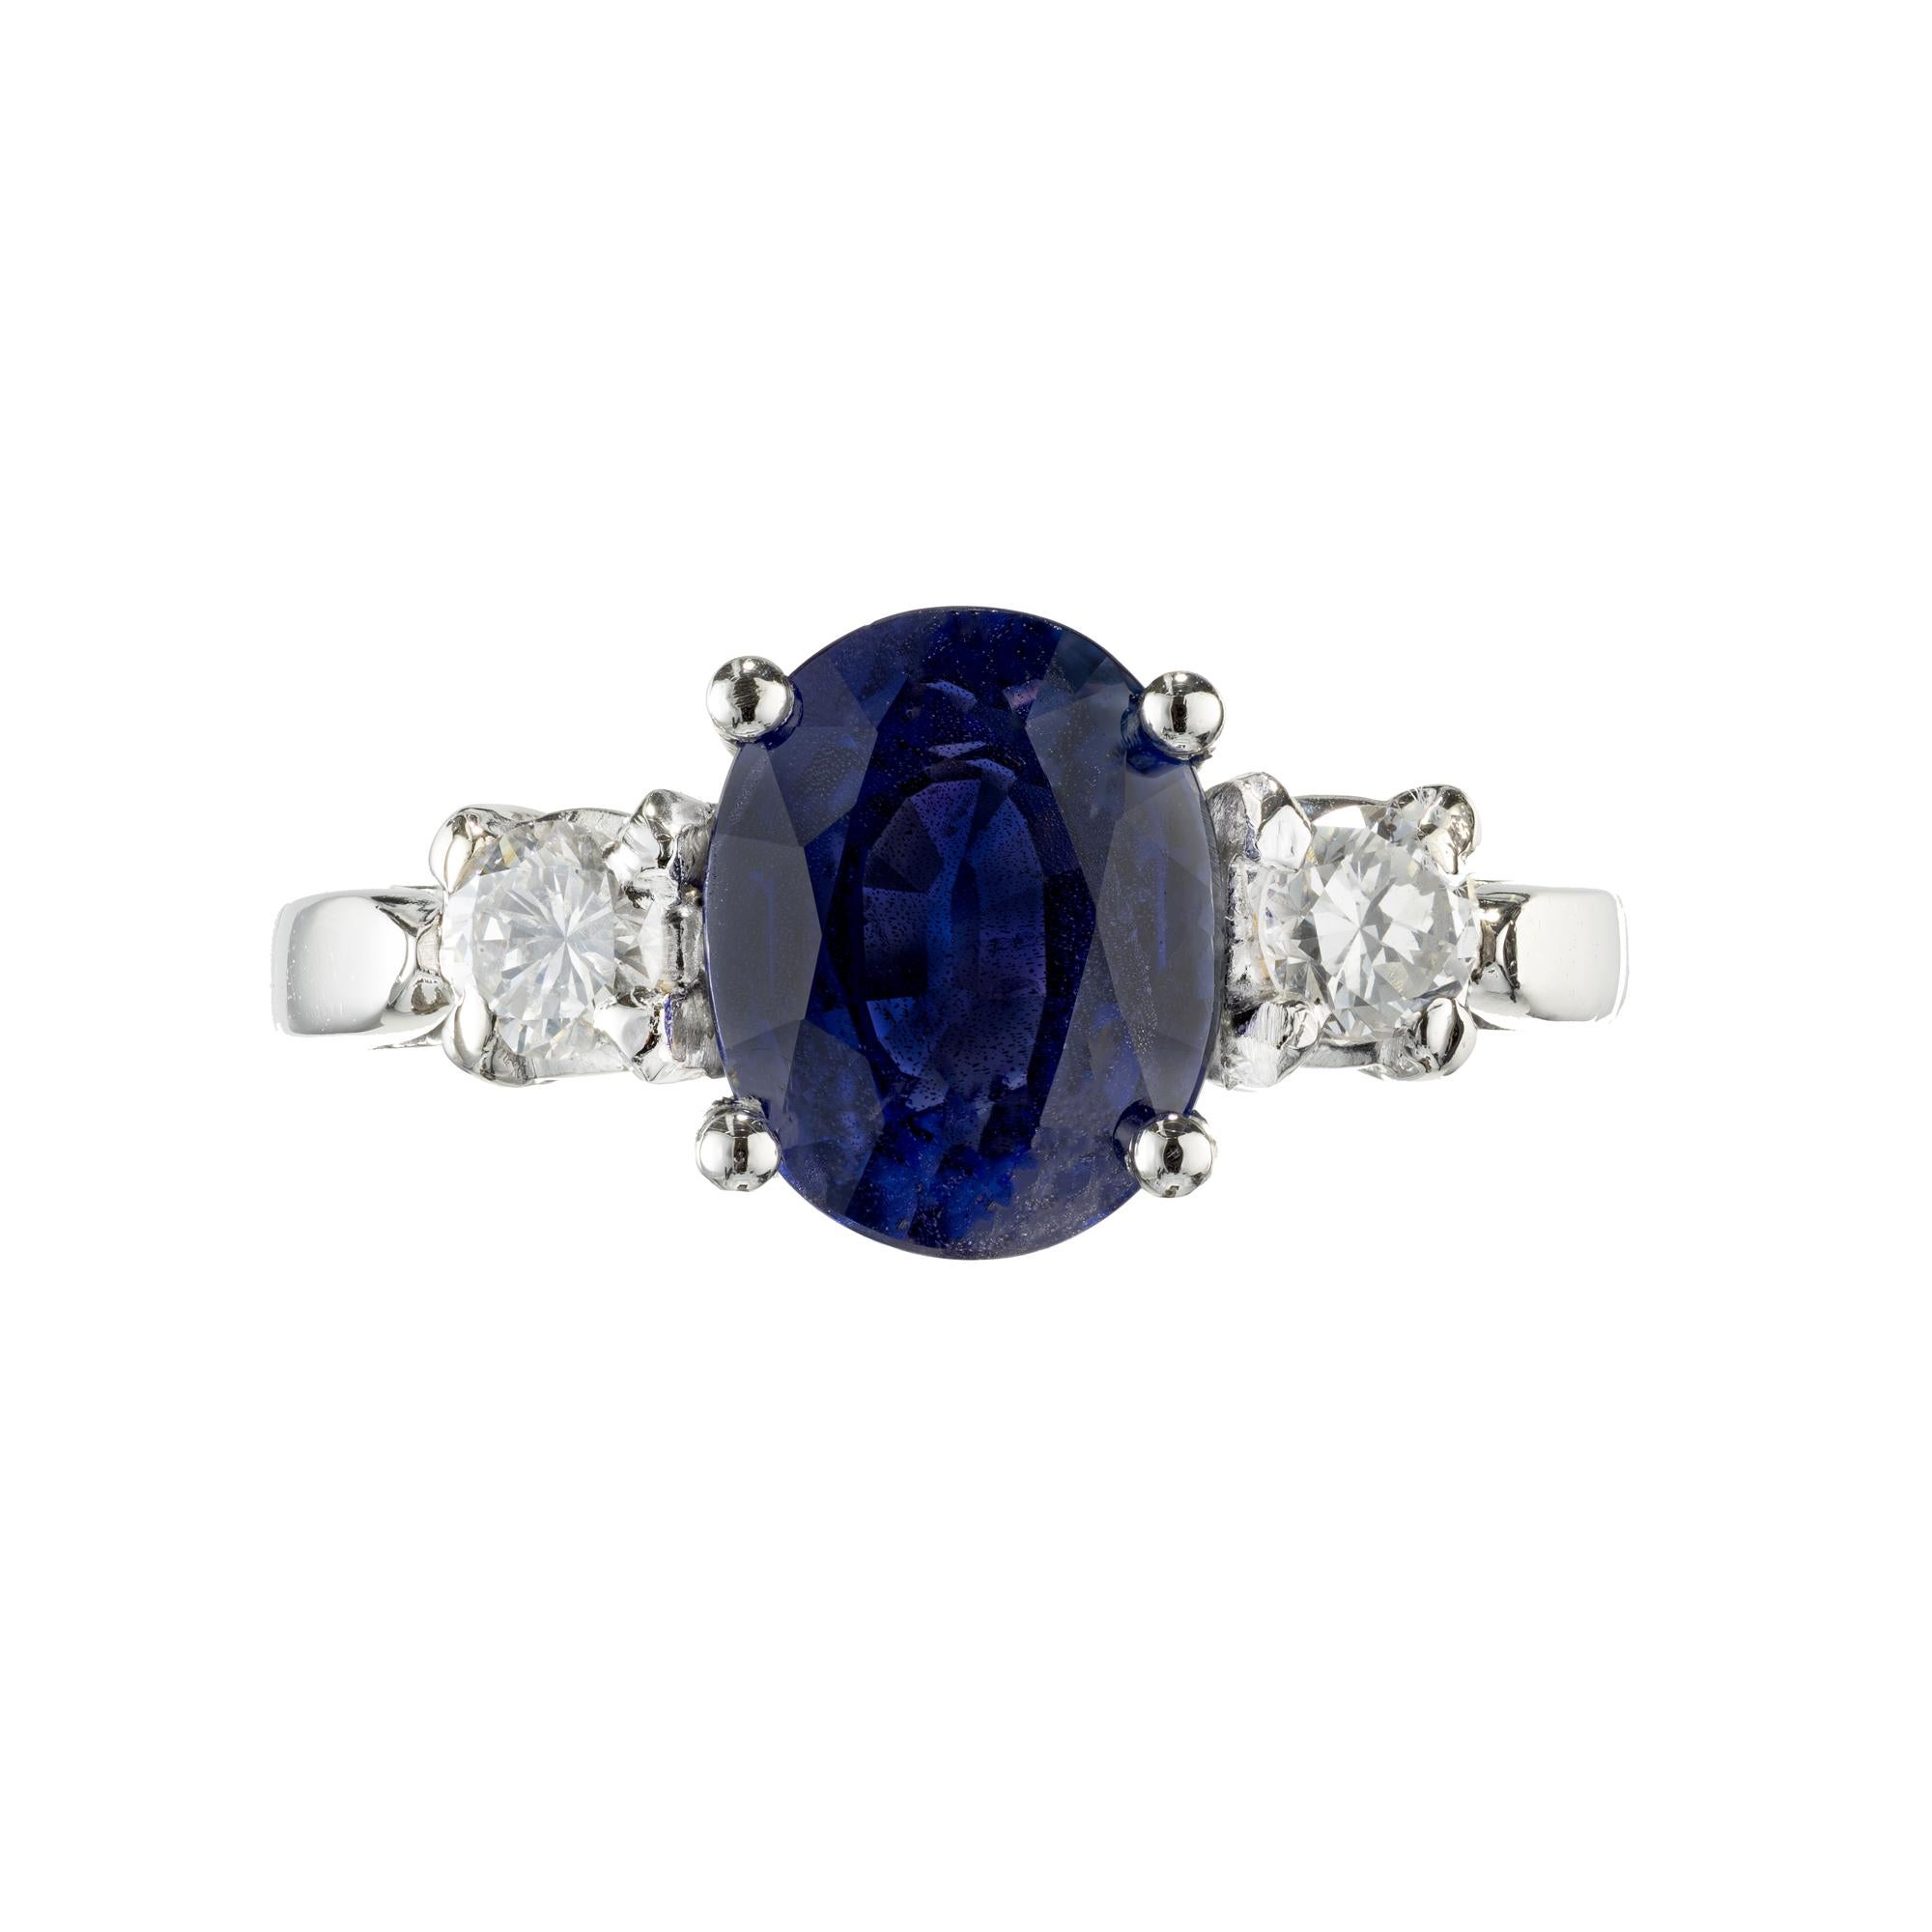 Three-stone sapphire and diamond engagement ring. GIA certified Fancy color natural no heat, no enhancement oval Sapphire center stone. Set in a platinum three-stone setting with 2 brilliant cut side diamonds. 

1 Rare gem cornflower oval blue